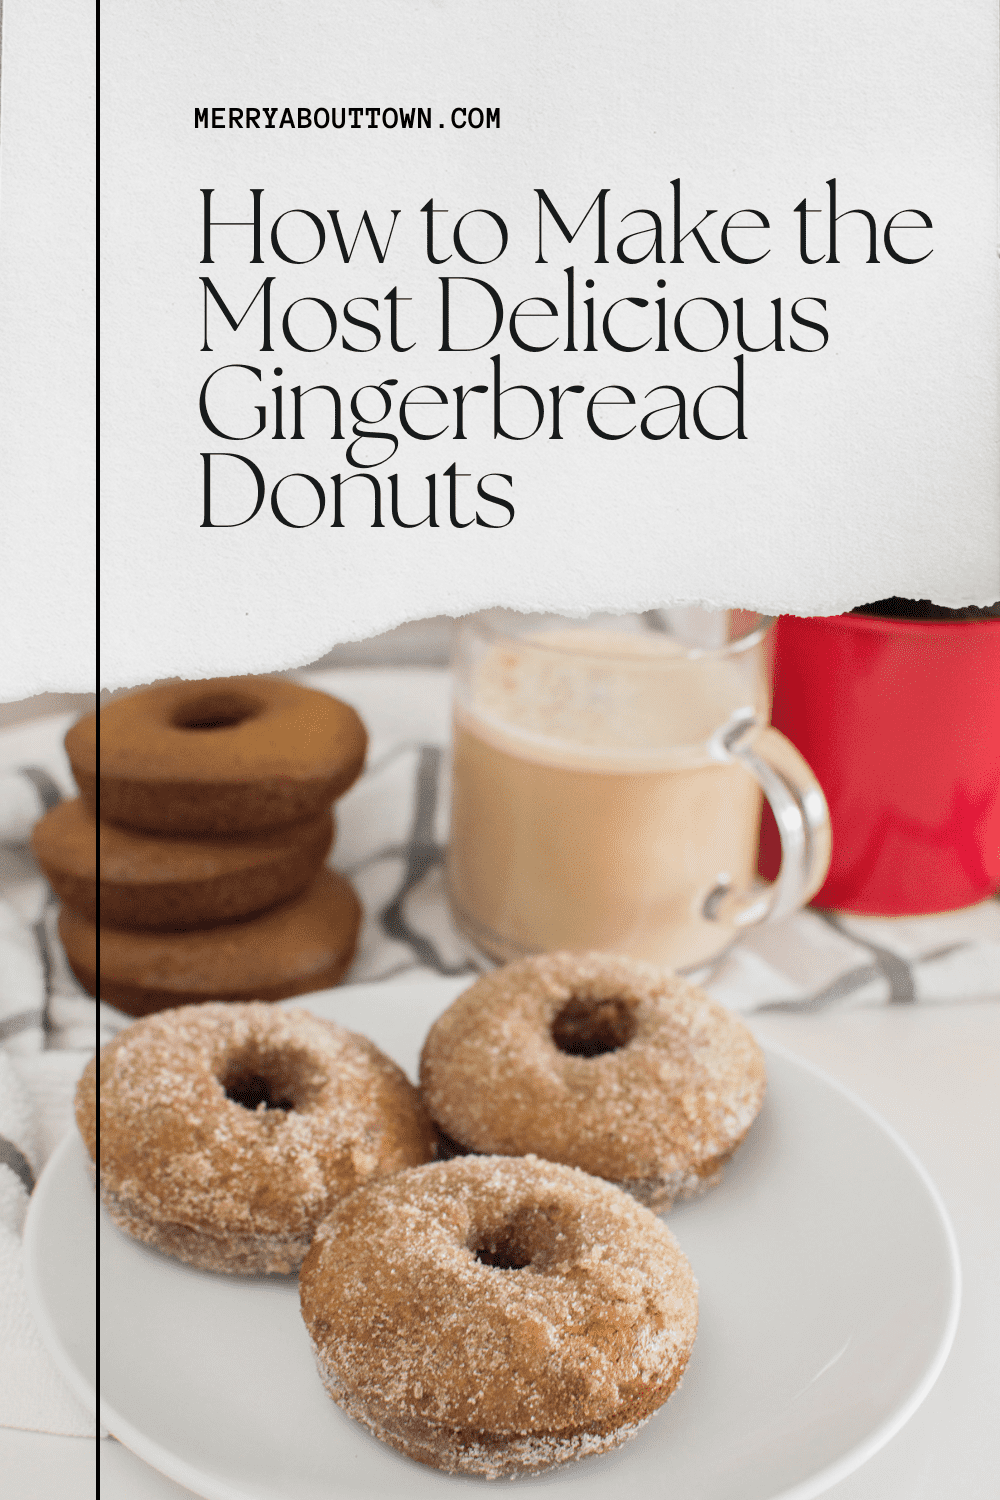 These gingerbread donuts are full of holiday flavor! If you love the taste of gingerbread cookies but also appreciate a good, fluffy baked donut – then this recipe is definitely for you!